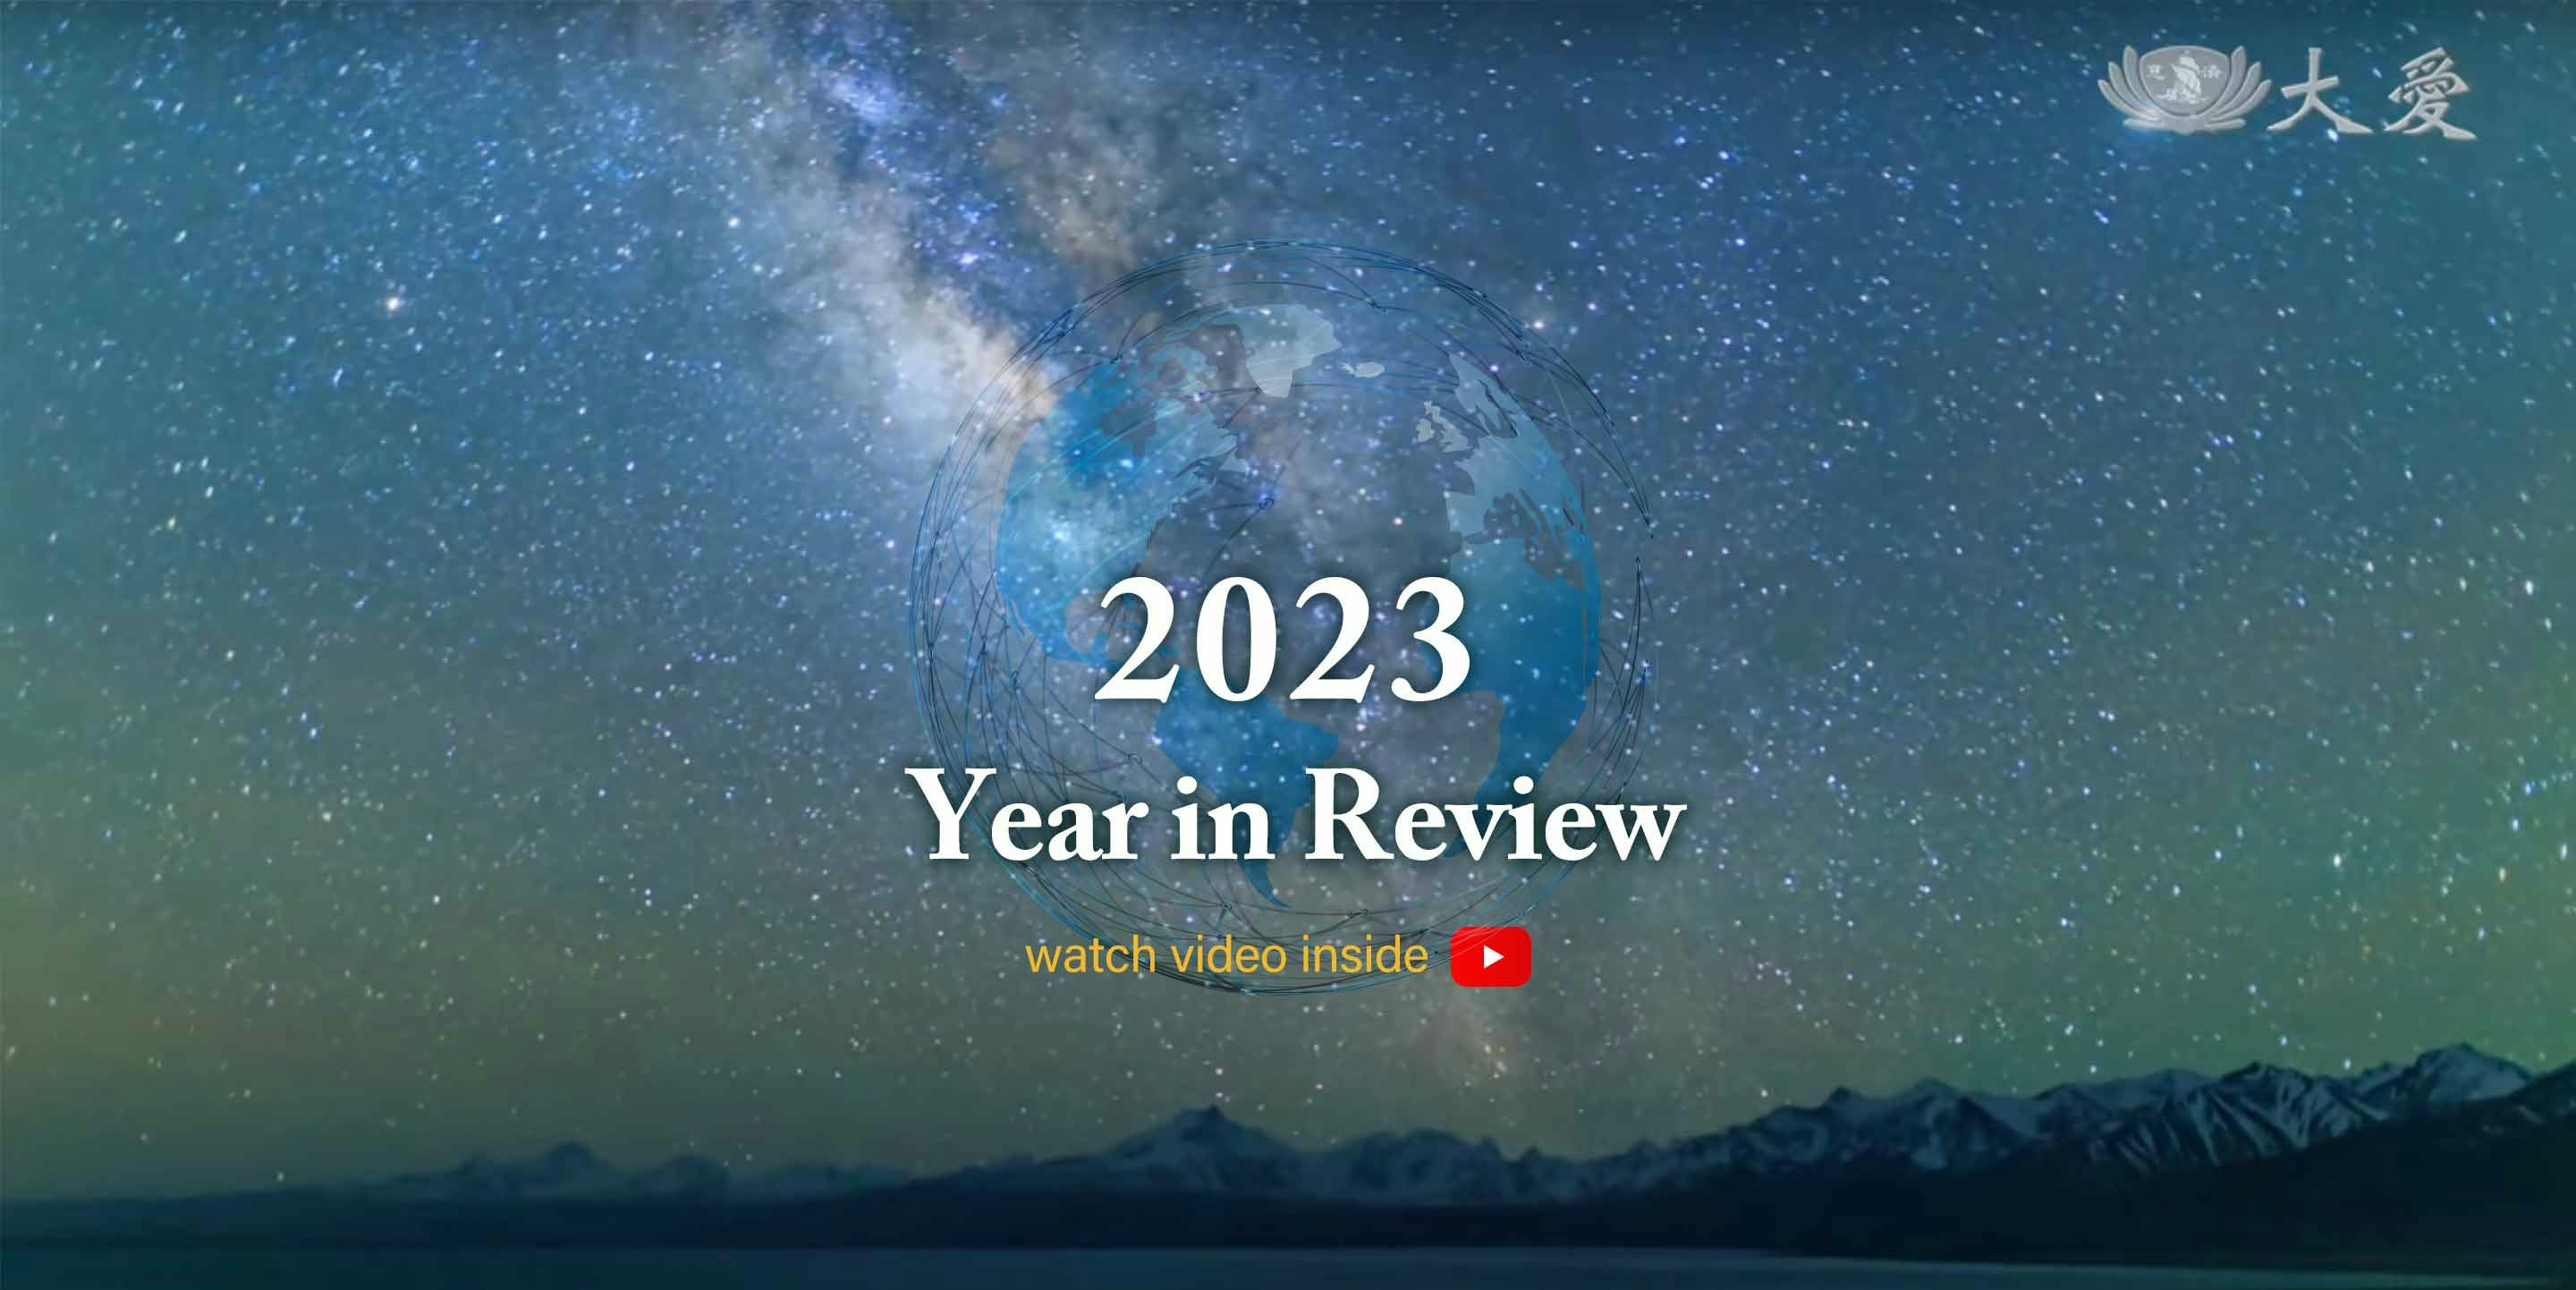 Tzu Chi 2023 Year in Review